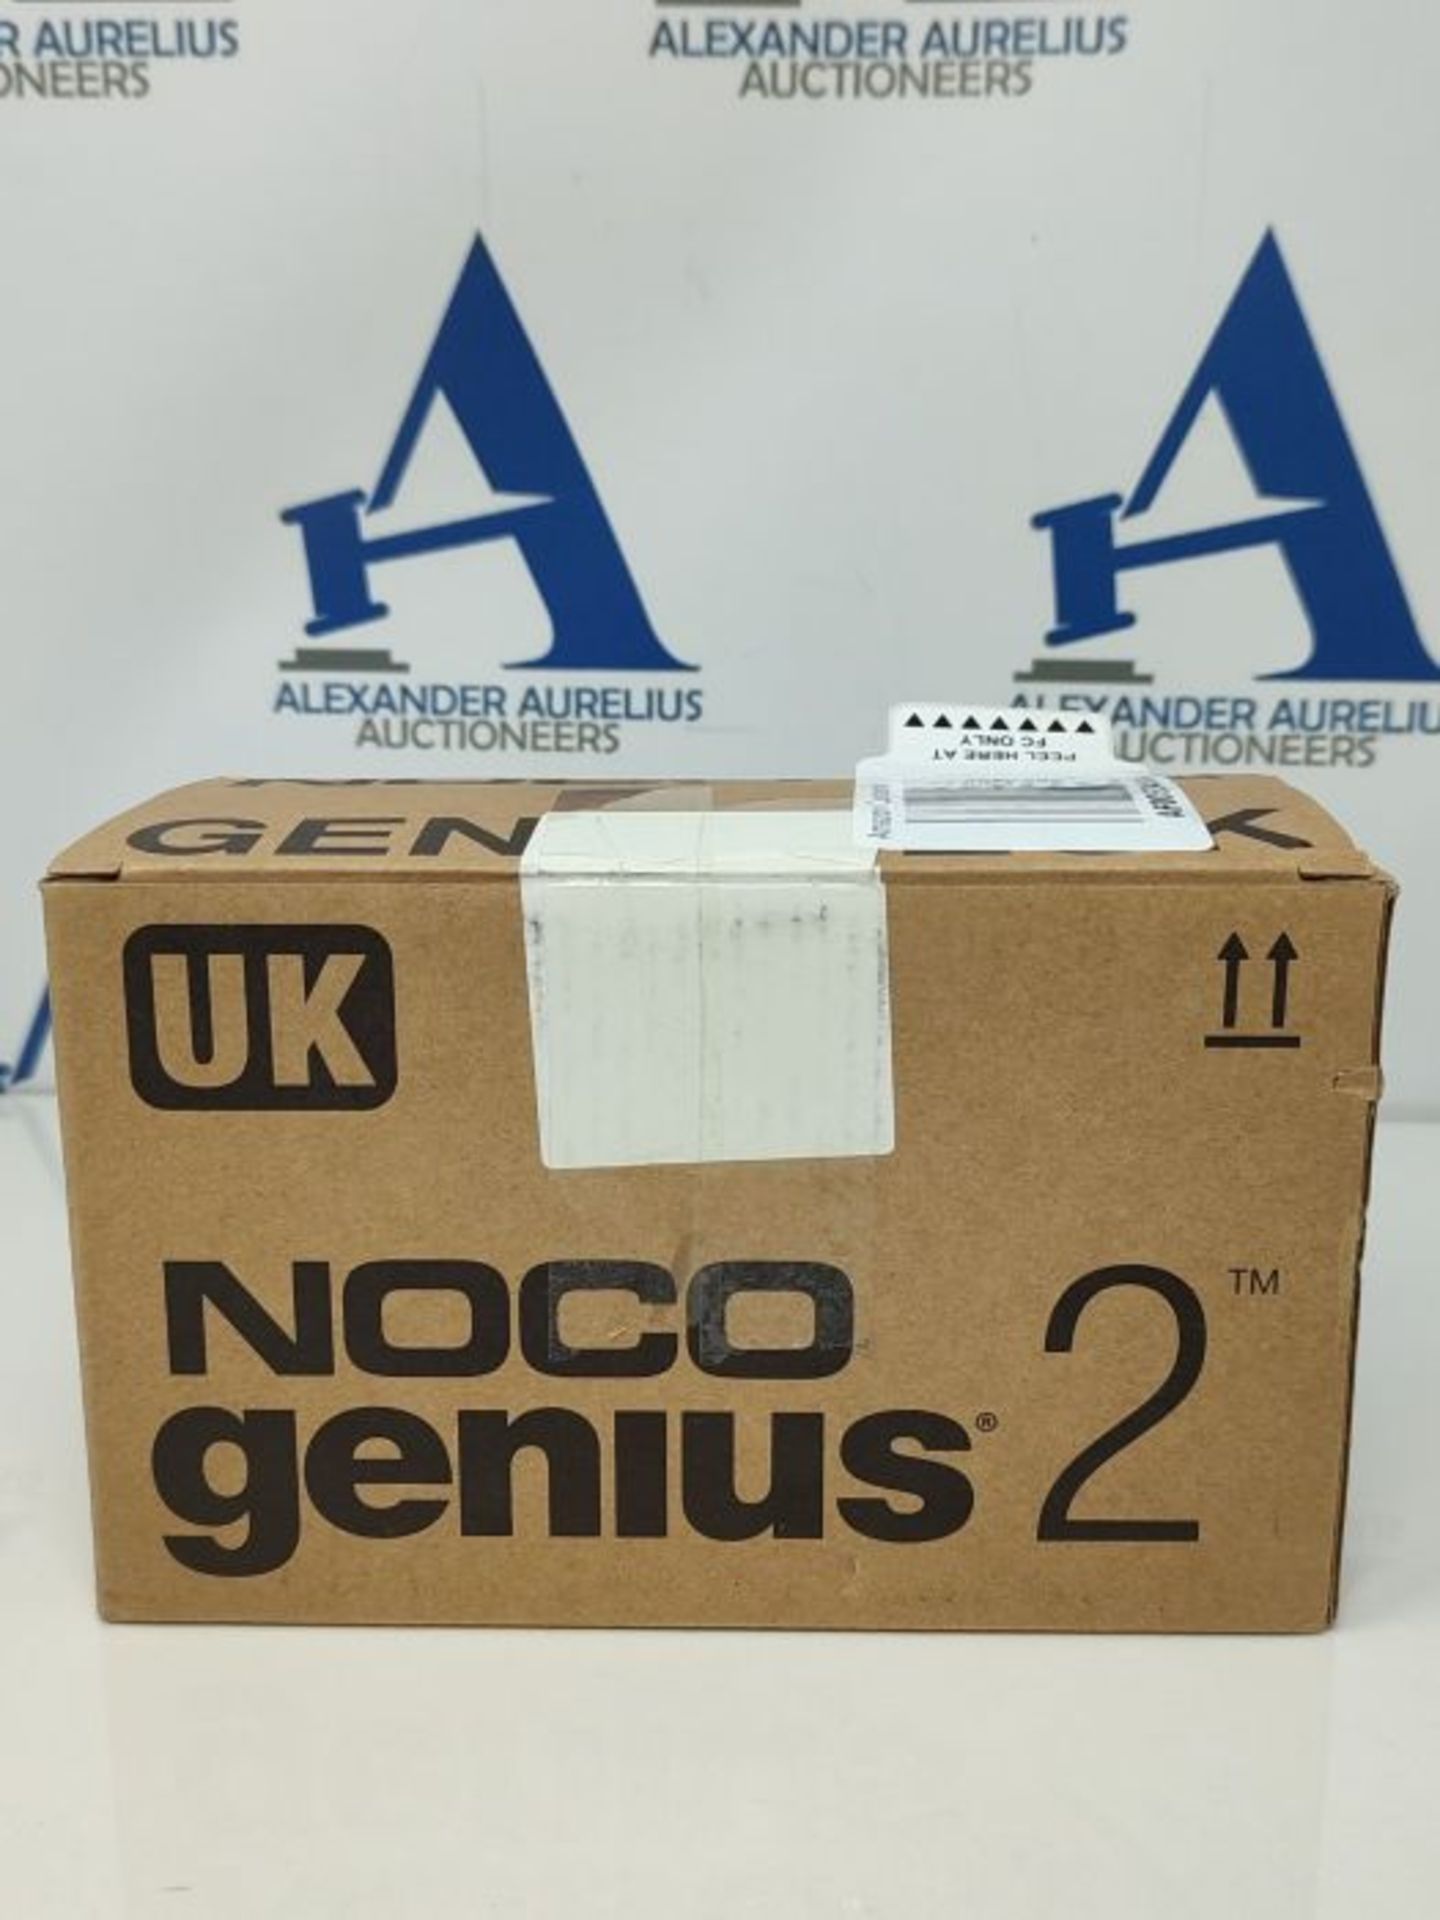 NOCO GENIUS2UK, 2A Smart Car Charger, 6V and 12V Portable Heavy-Duty Battery Charger M - Image 2 of 3